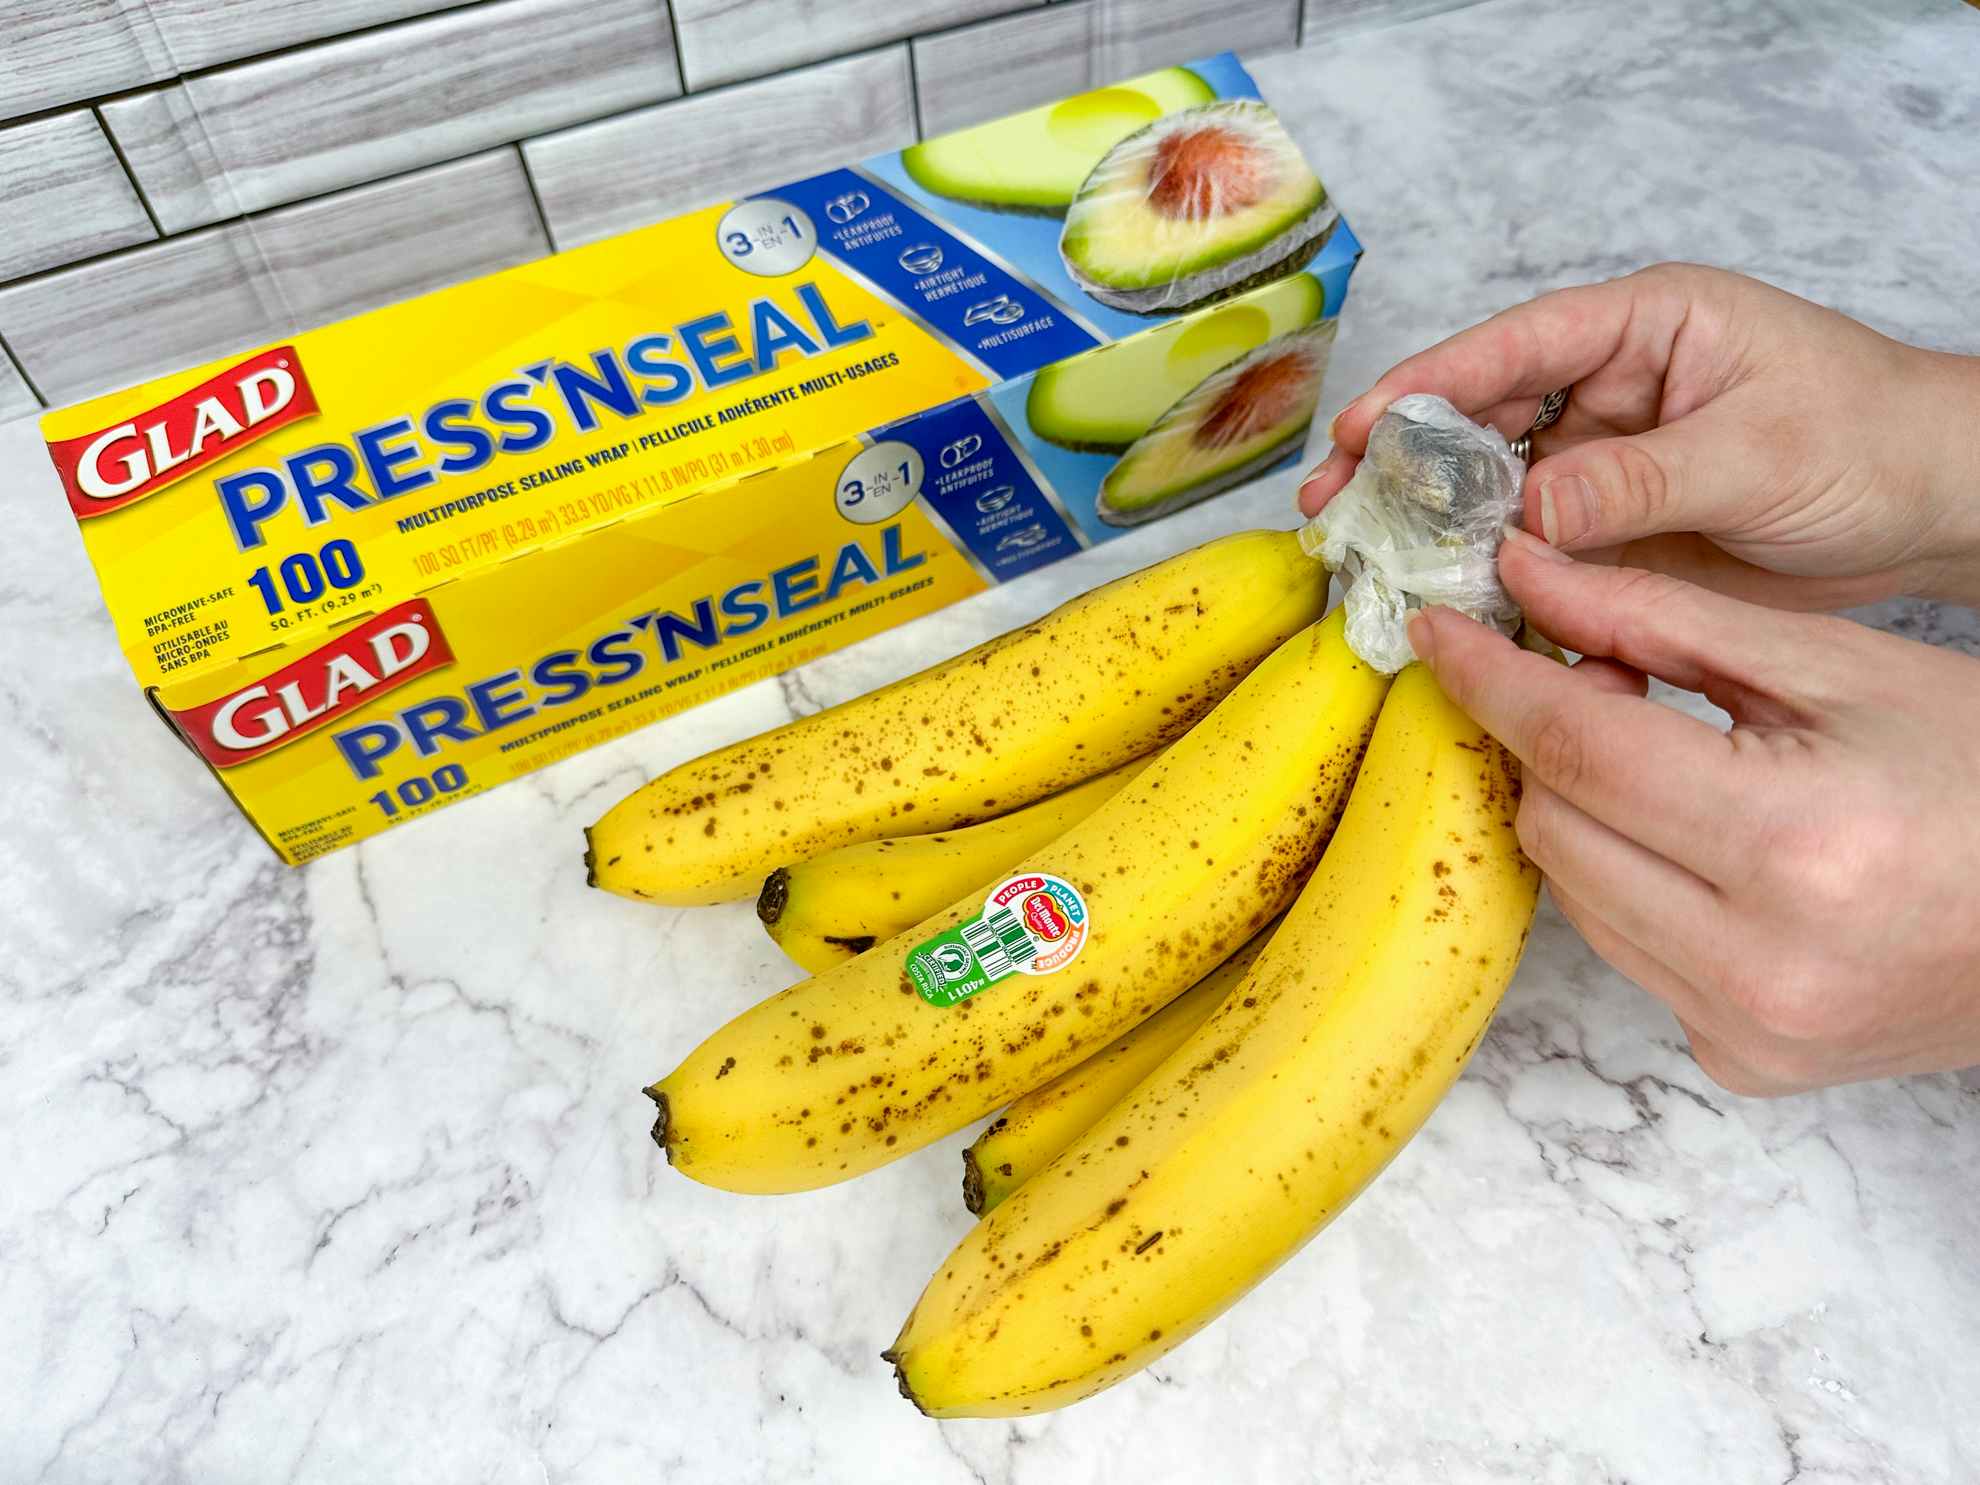 https://prod-cdn-thekrazycouponlady.imgix.net/wp-content/uploads/2023/05/how-to-use-glad-press-n-seal-pressnseal-bananas-keep-fresh-sponsored-kcl-lp-06-1685481820-1685481820-e1685481963551.jpg?auto=format&fit=fill&q=25